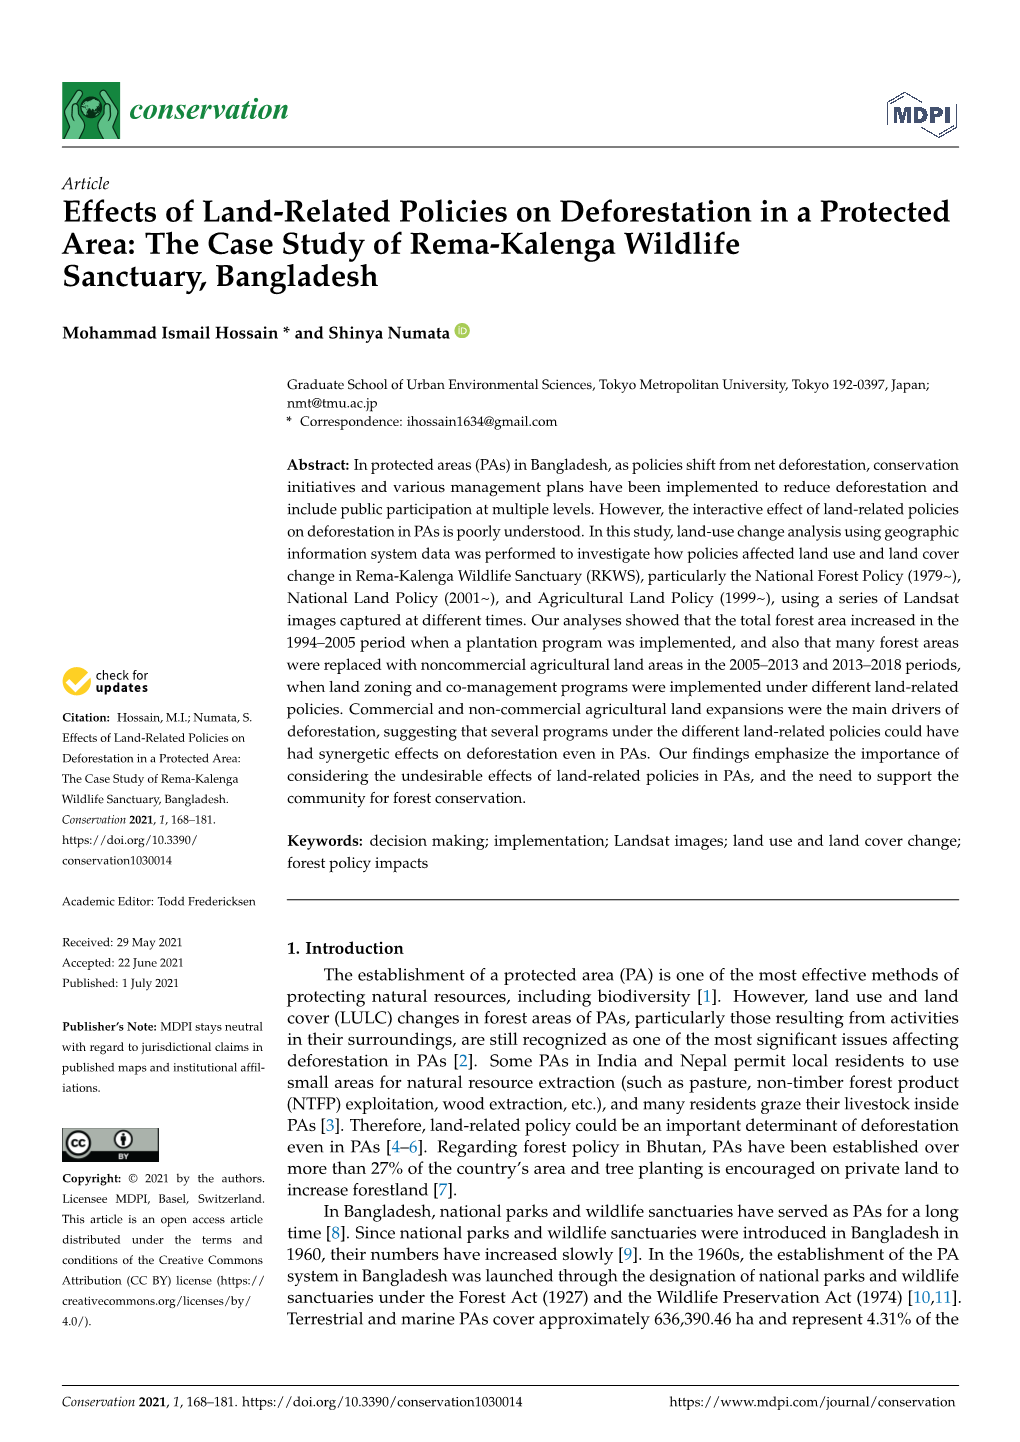 Effects of Land-Related Policies on Deforestation in a Protected Area: the Case Study of Rema-Kalenga Wildlife Sanctuary, Bangladesh